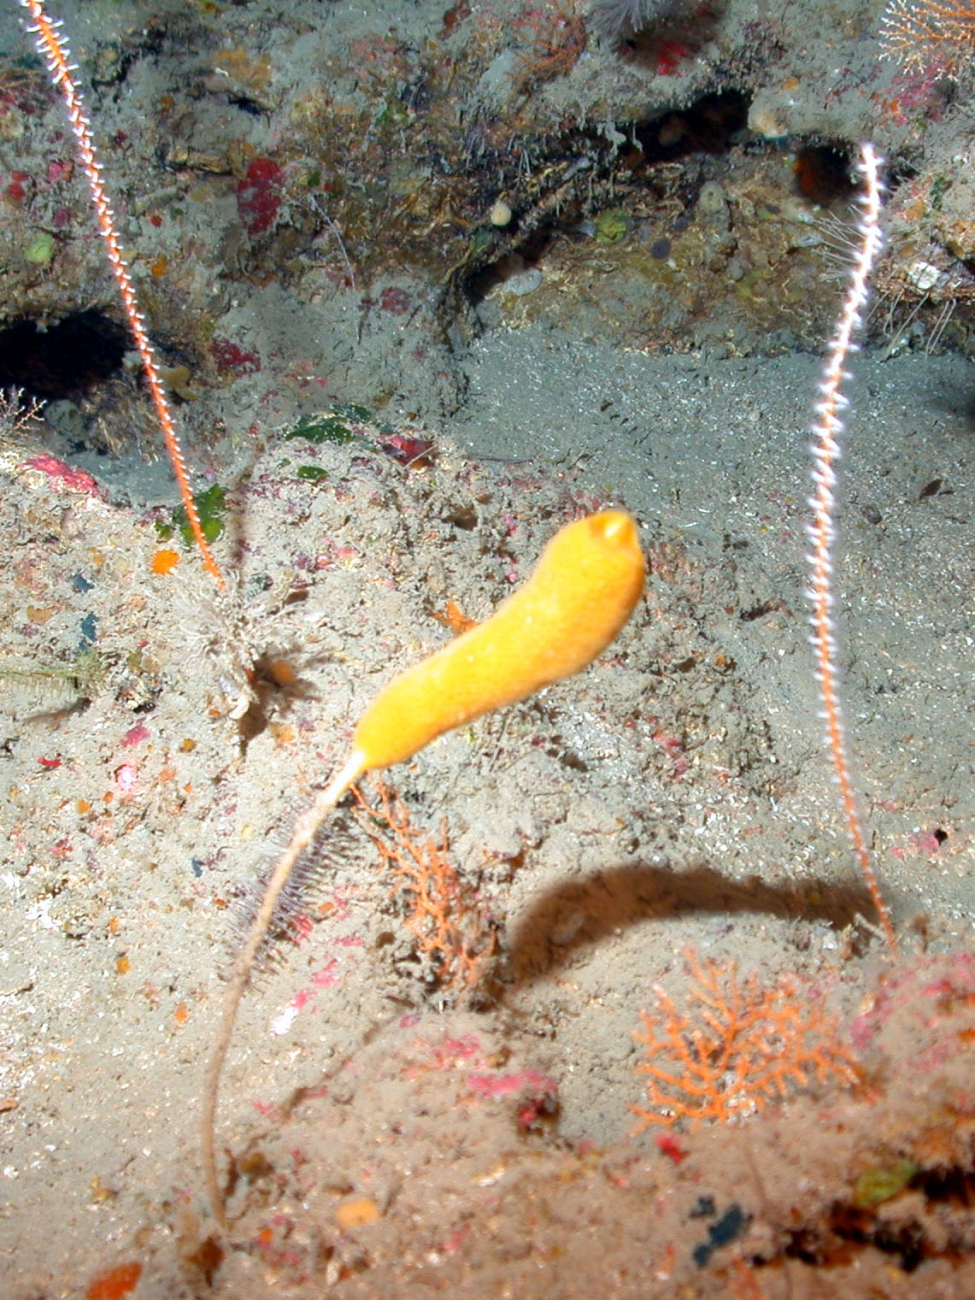 Whip corals and a stalked glass sponge